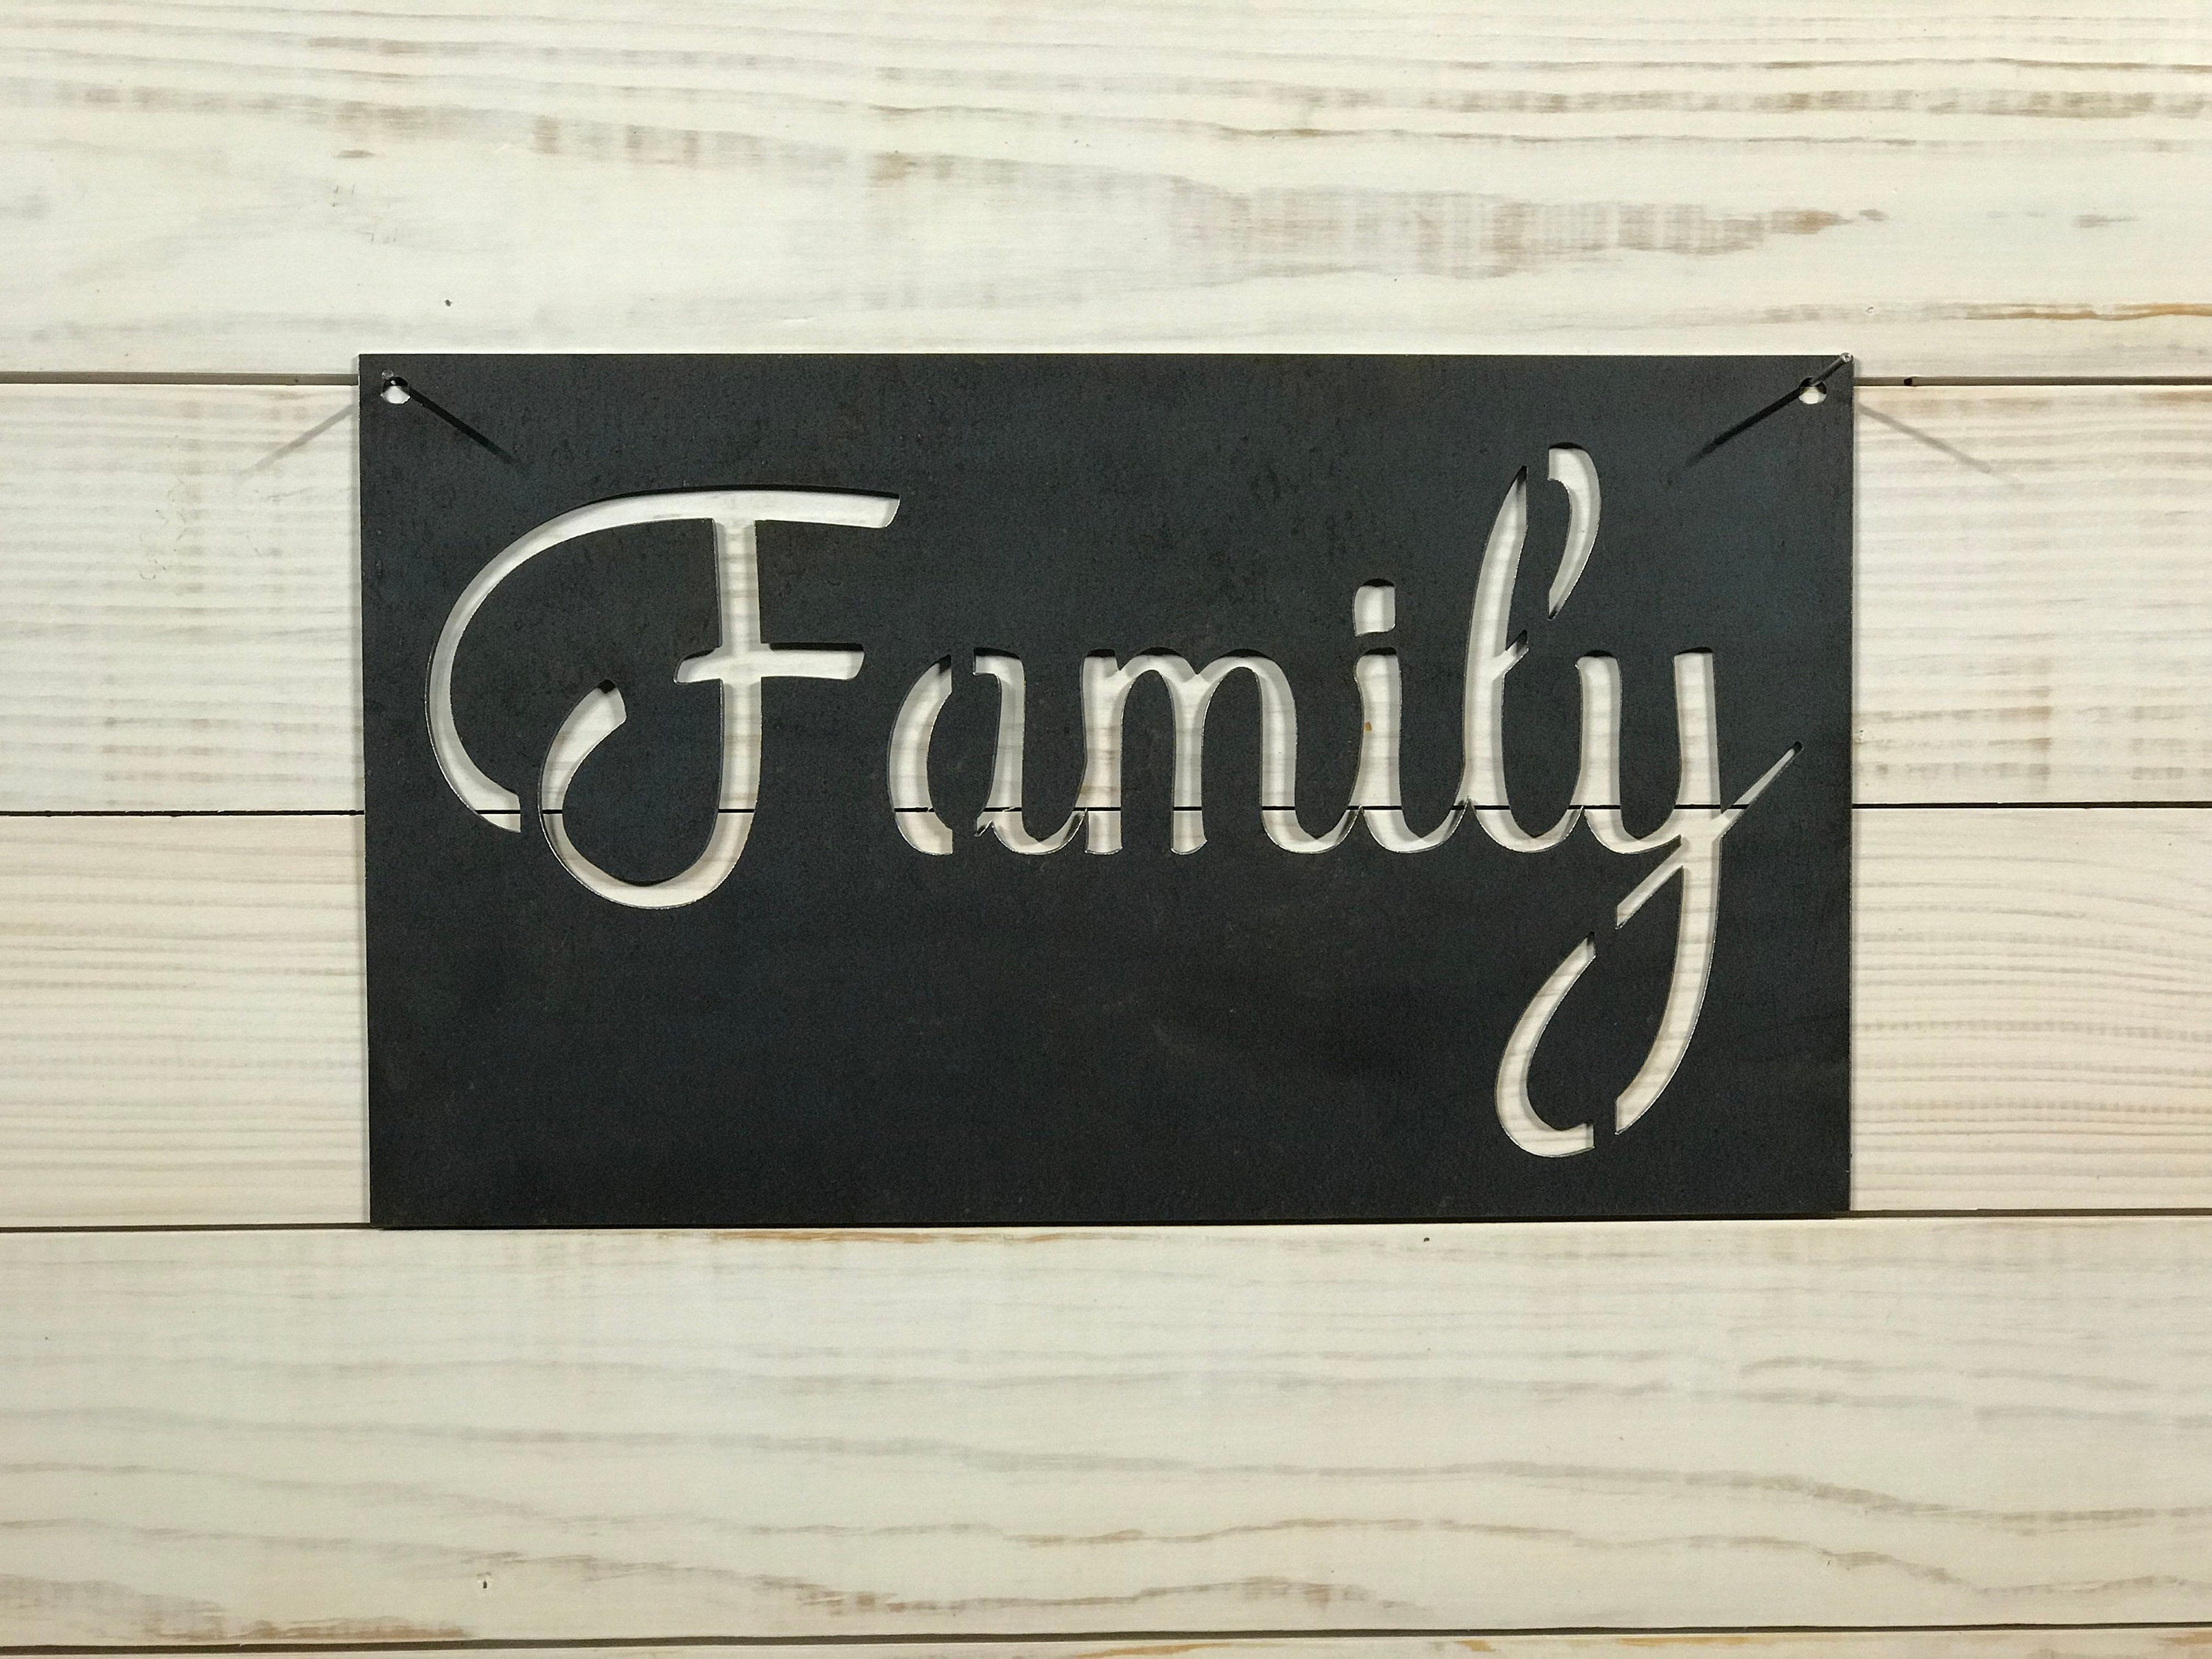 Rustic Metal Family Sign, Metal Wall Decor, Farmhouse Style Decor, Personalized Sign, Rustic Custom Sign, Fixer Upper Sign, Hand Painted Laser Cut Metal Signs Custom Gift Ideas 12x12IN